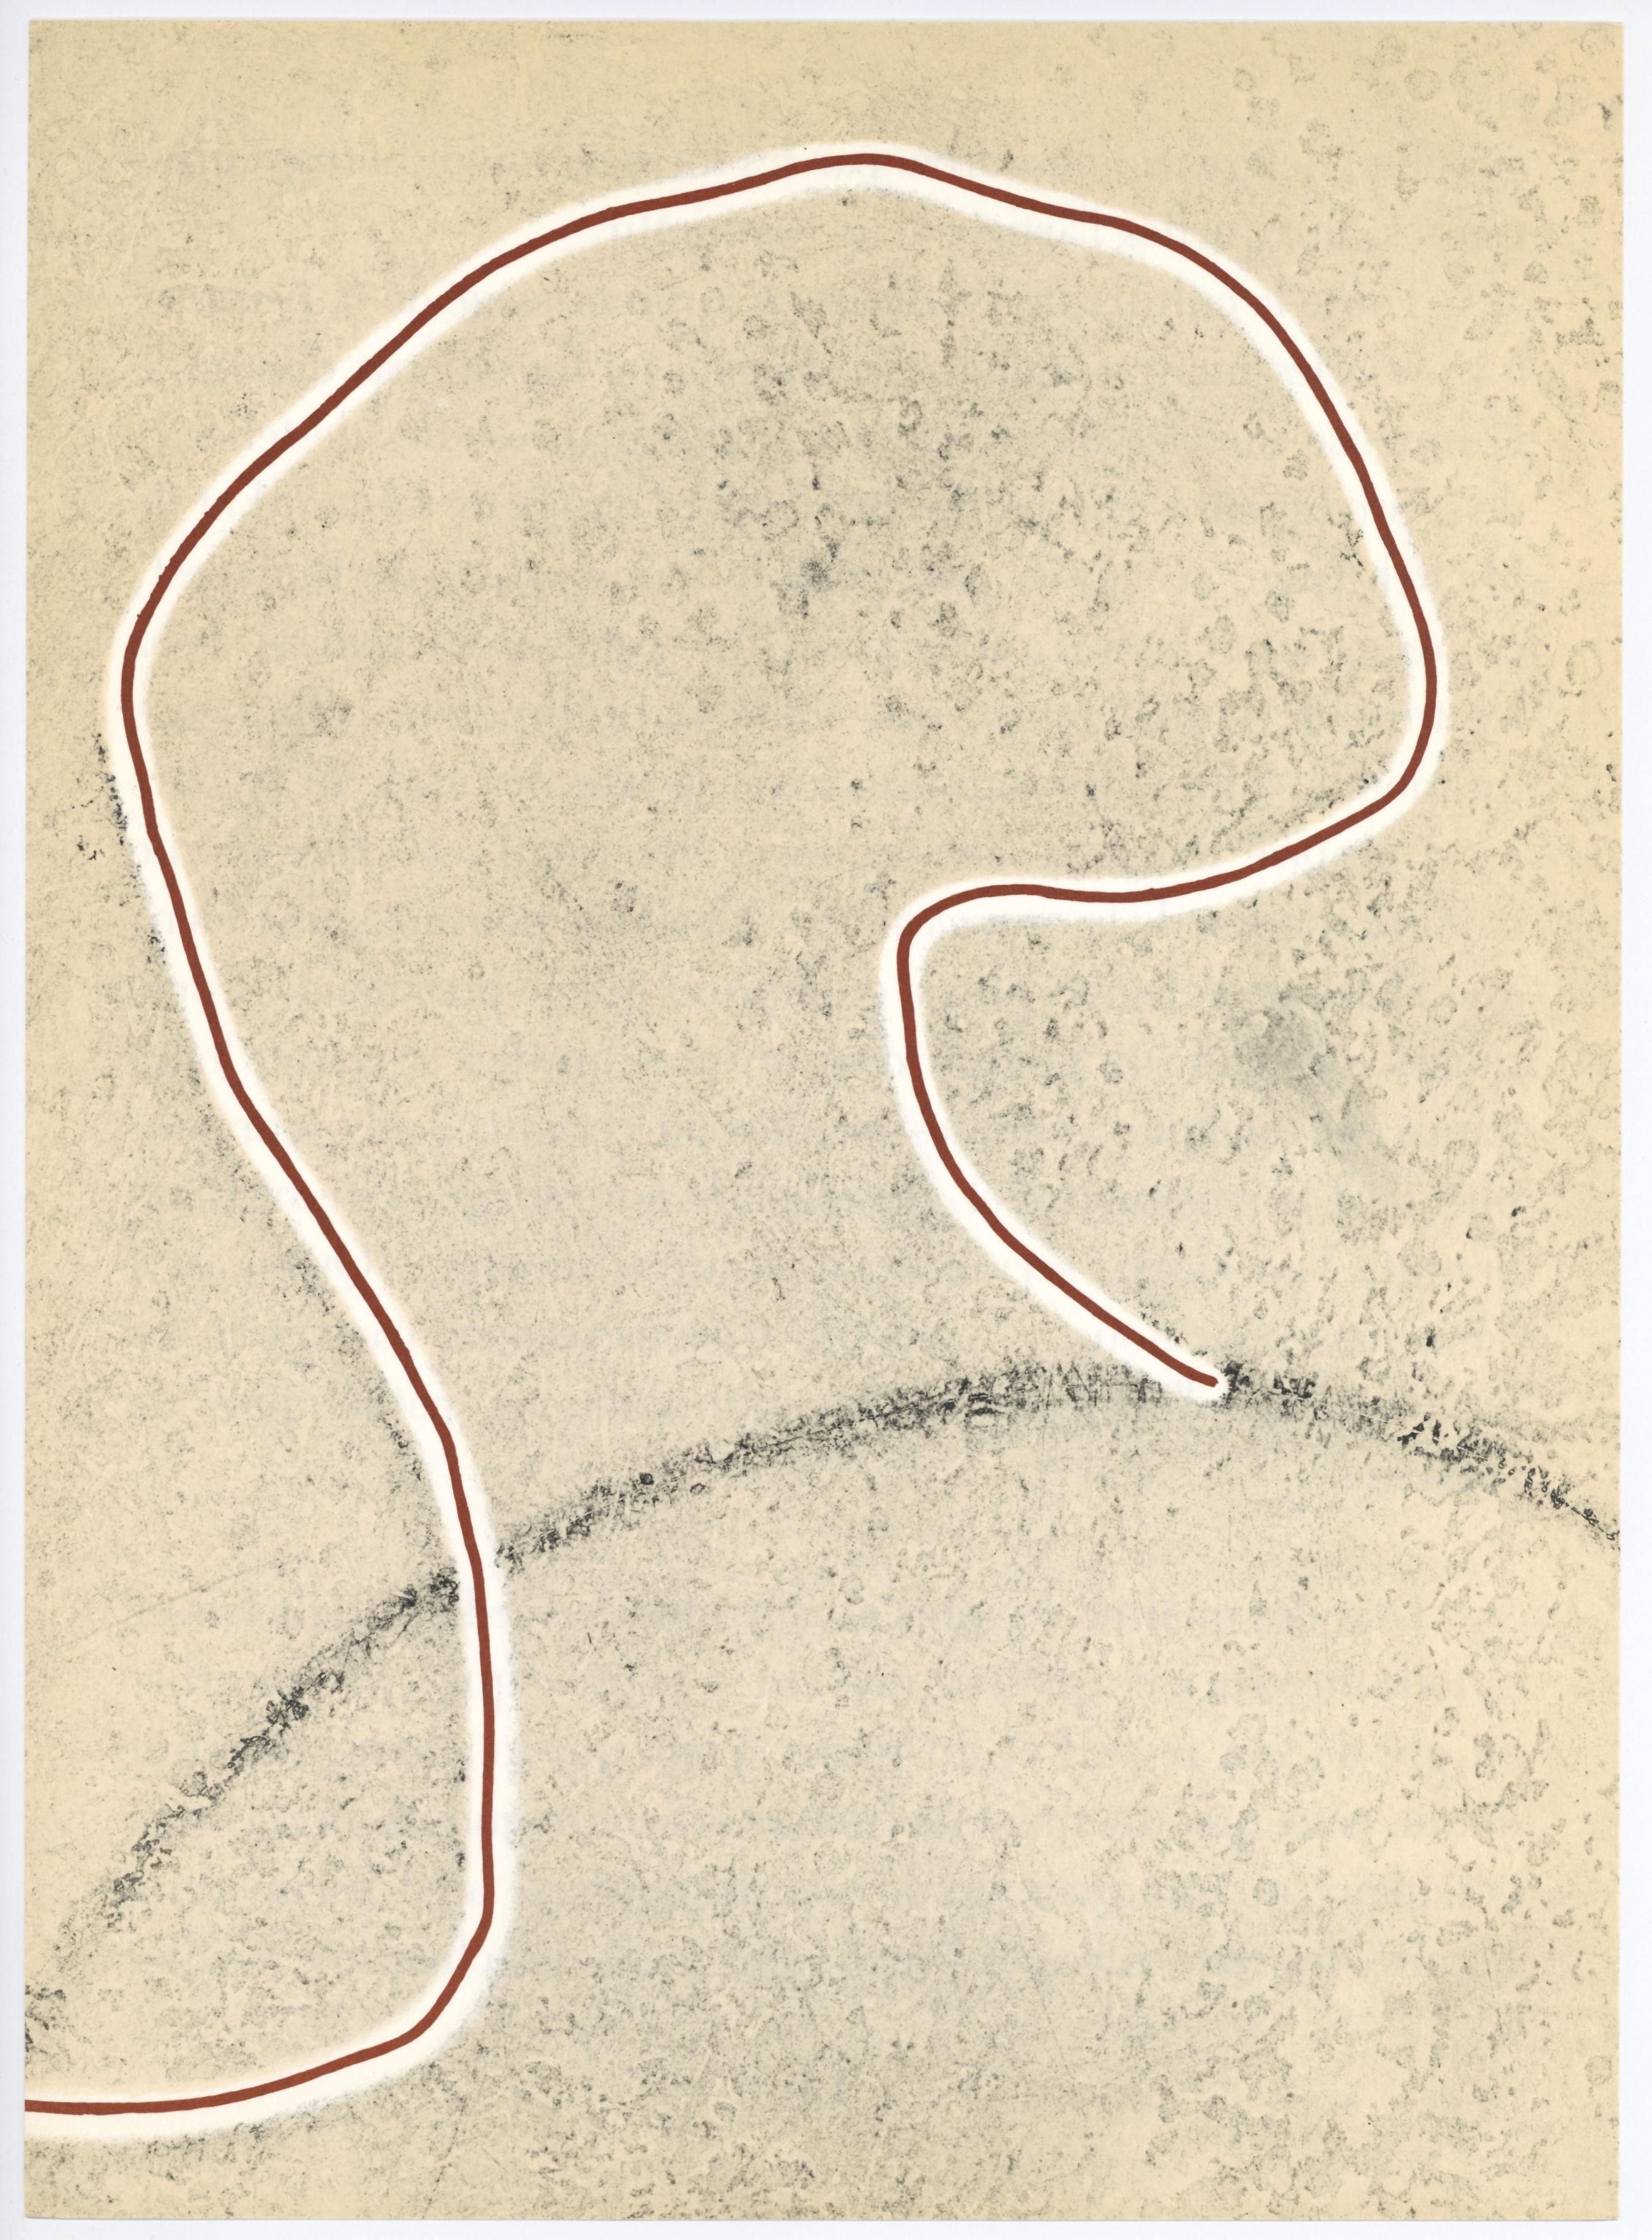 Lithograph on wove paper. Inscription: Unsigned and unnumbered. Good Condition. Notes: From Derrière le miroir, N° 211, published by Derrière le miroir, Paris; printed by Galerie Maeght, Paris, 1974. Excerpted from a Christie’s, New York lot essay,